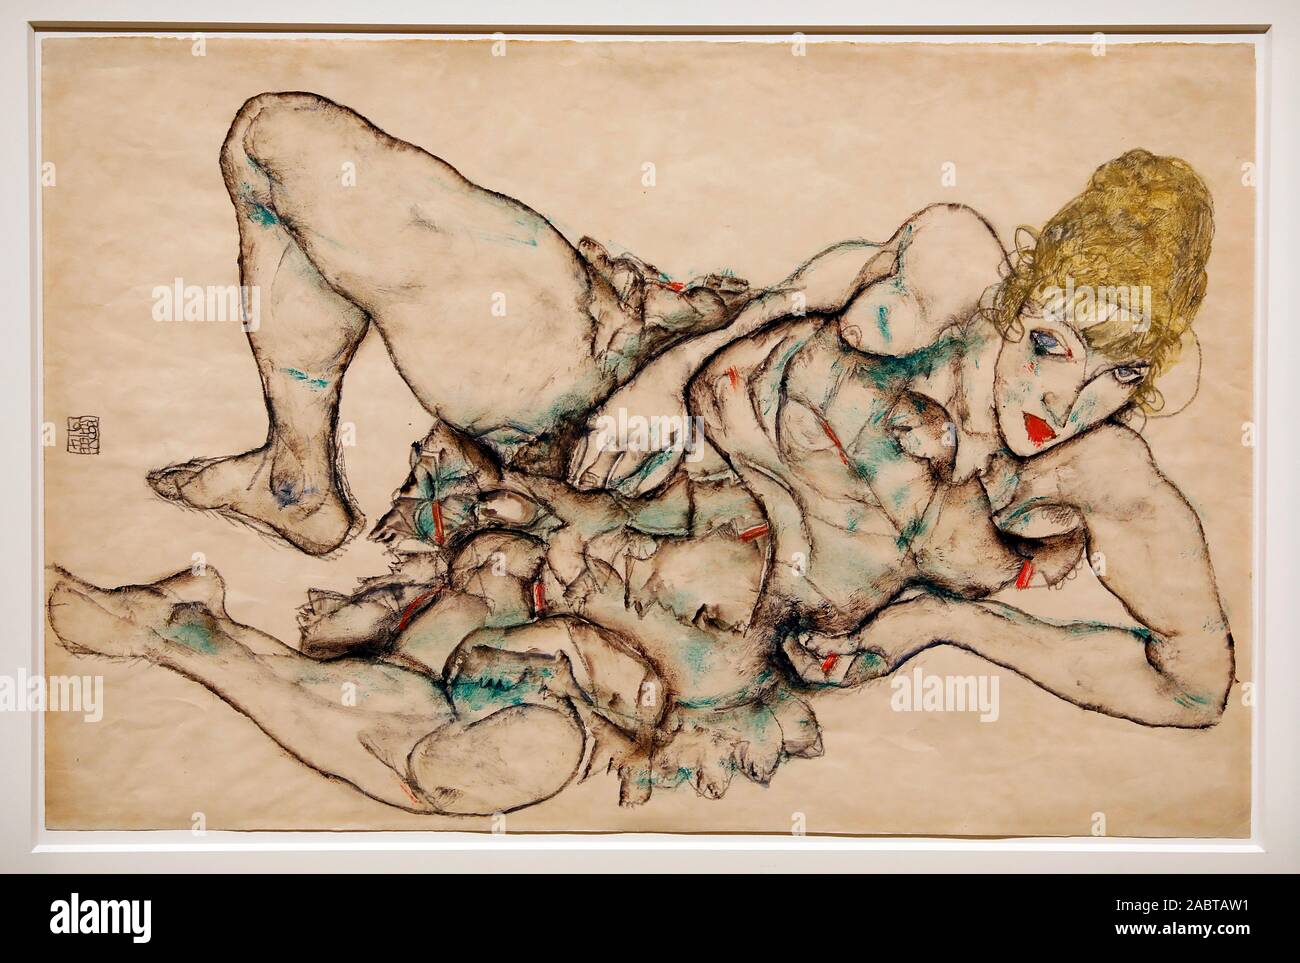 Egon Schiele, Reclining woman with blond hair, 1914, transparent and opaque watercolour over graphite on paper. Stock Photo